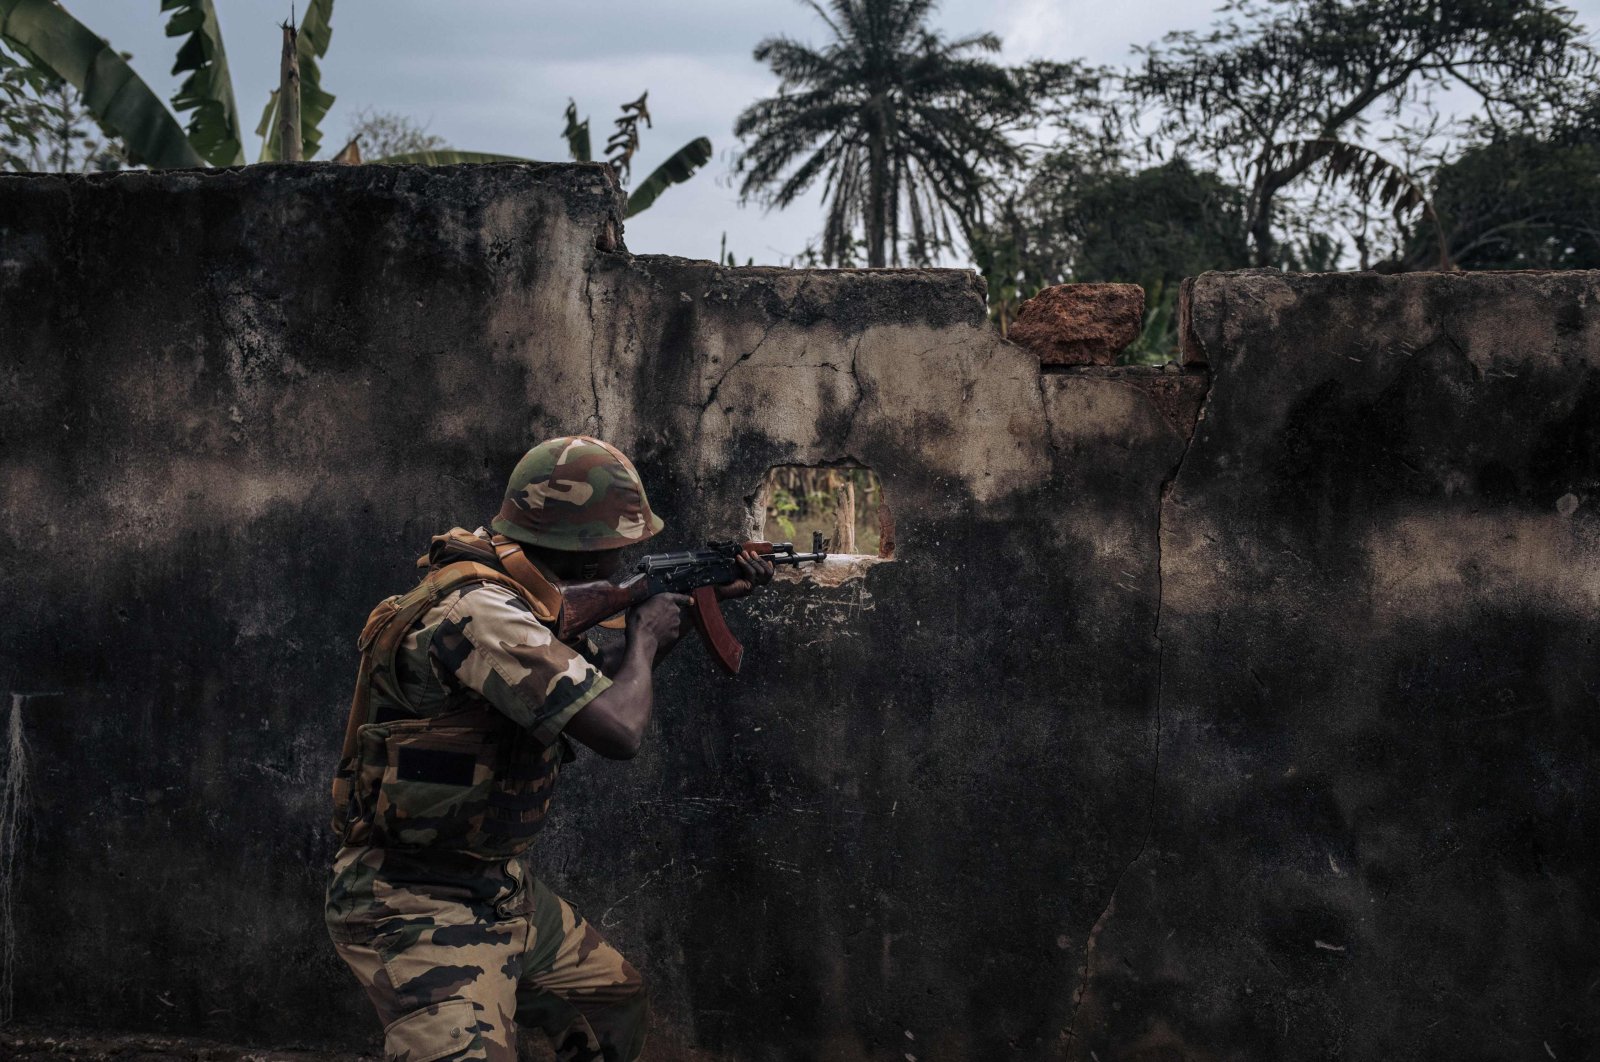 A soldier of the Central African Army (FACA) aims during a rebel assault in Bangassou, Central African Republic, Feb. 3, 2021. (AFP Photo)